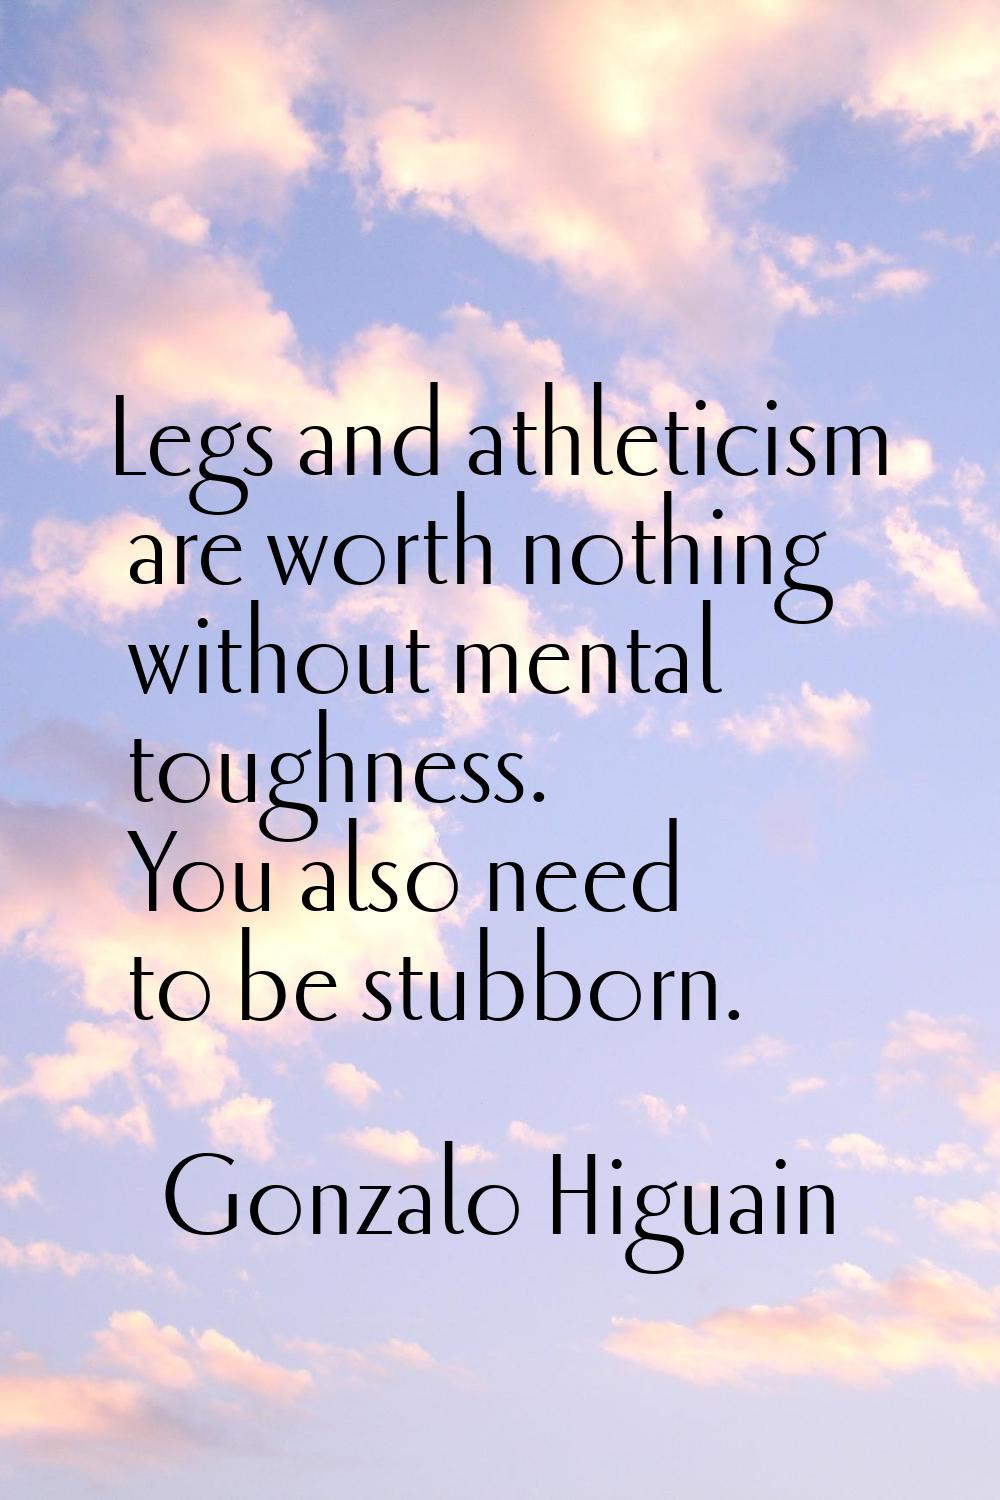 Legs and athleticism are worth nothing without mental toughness. You also need to be stubborn.